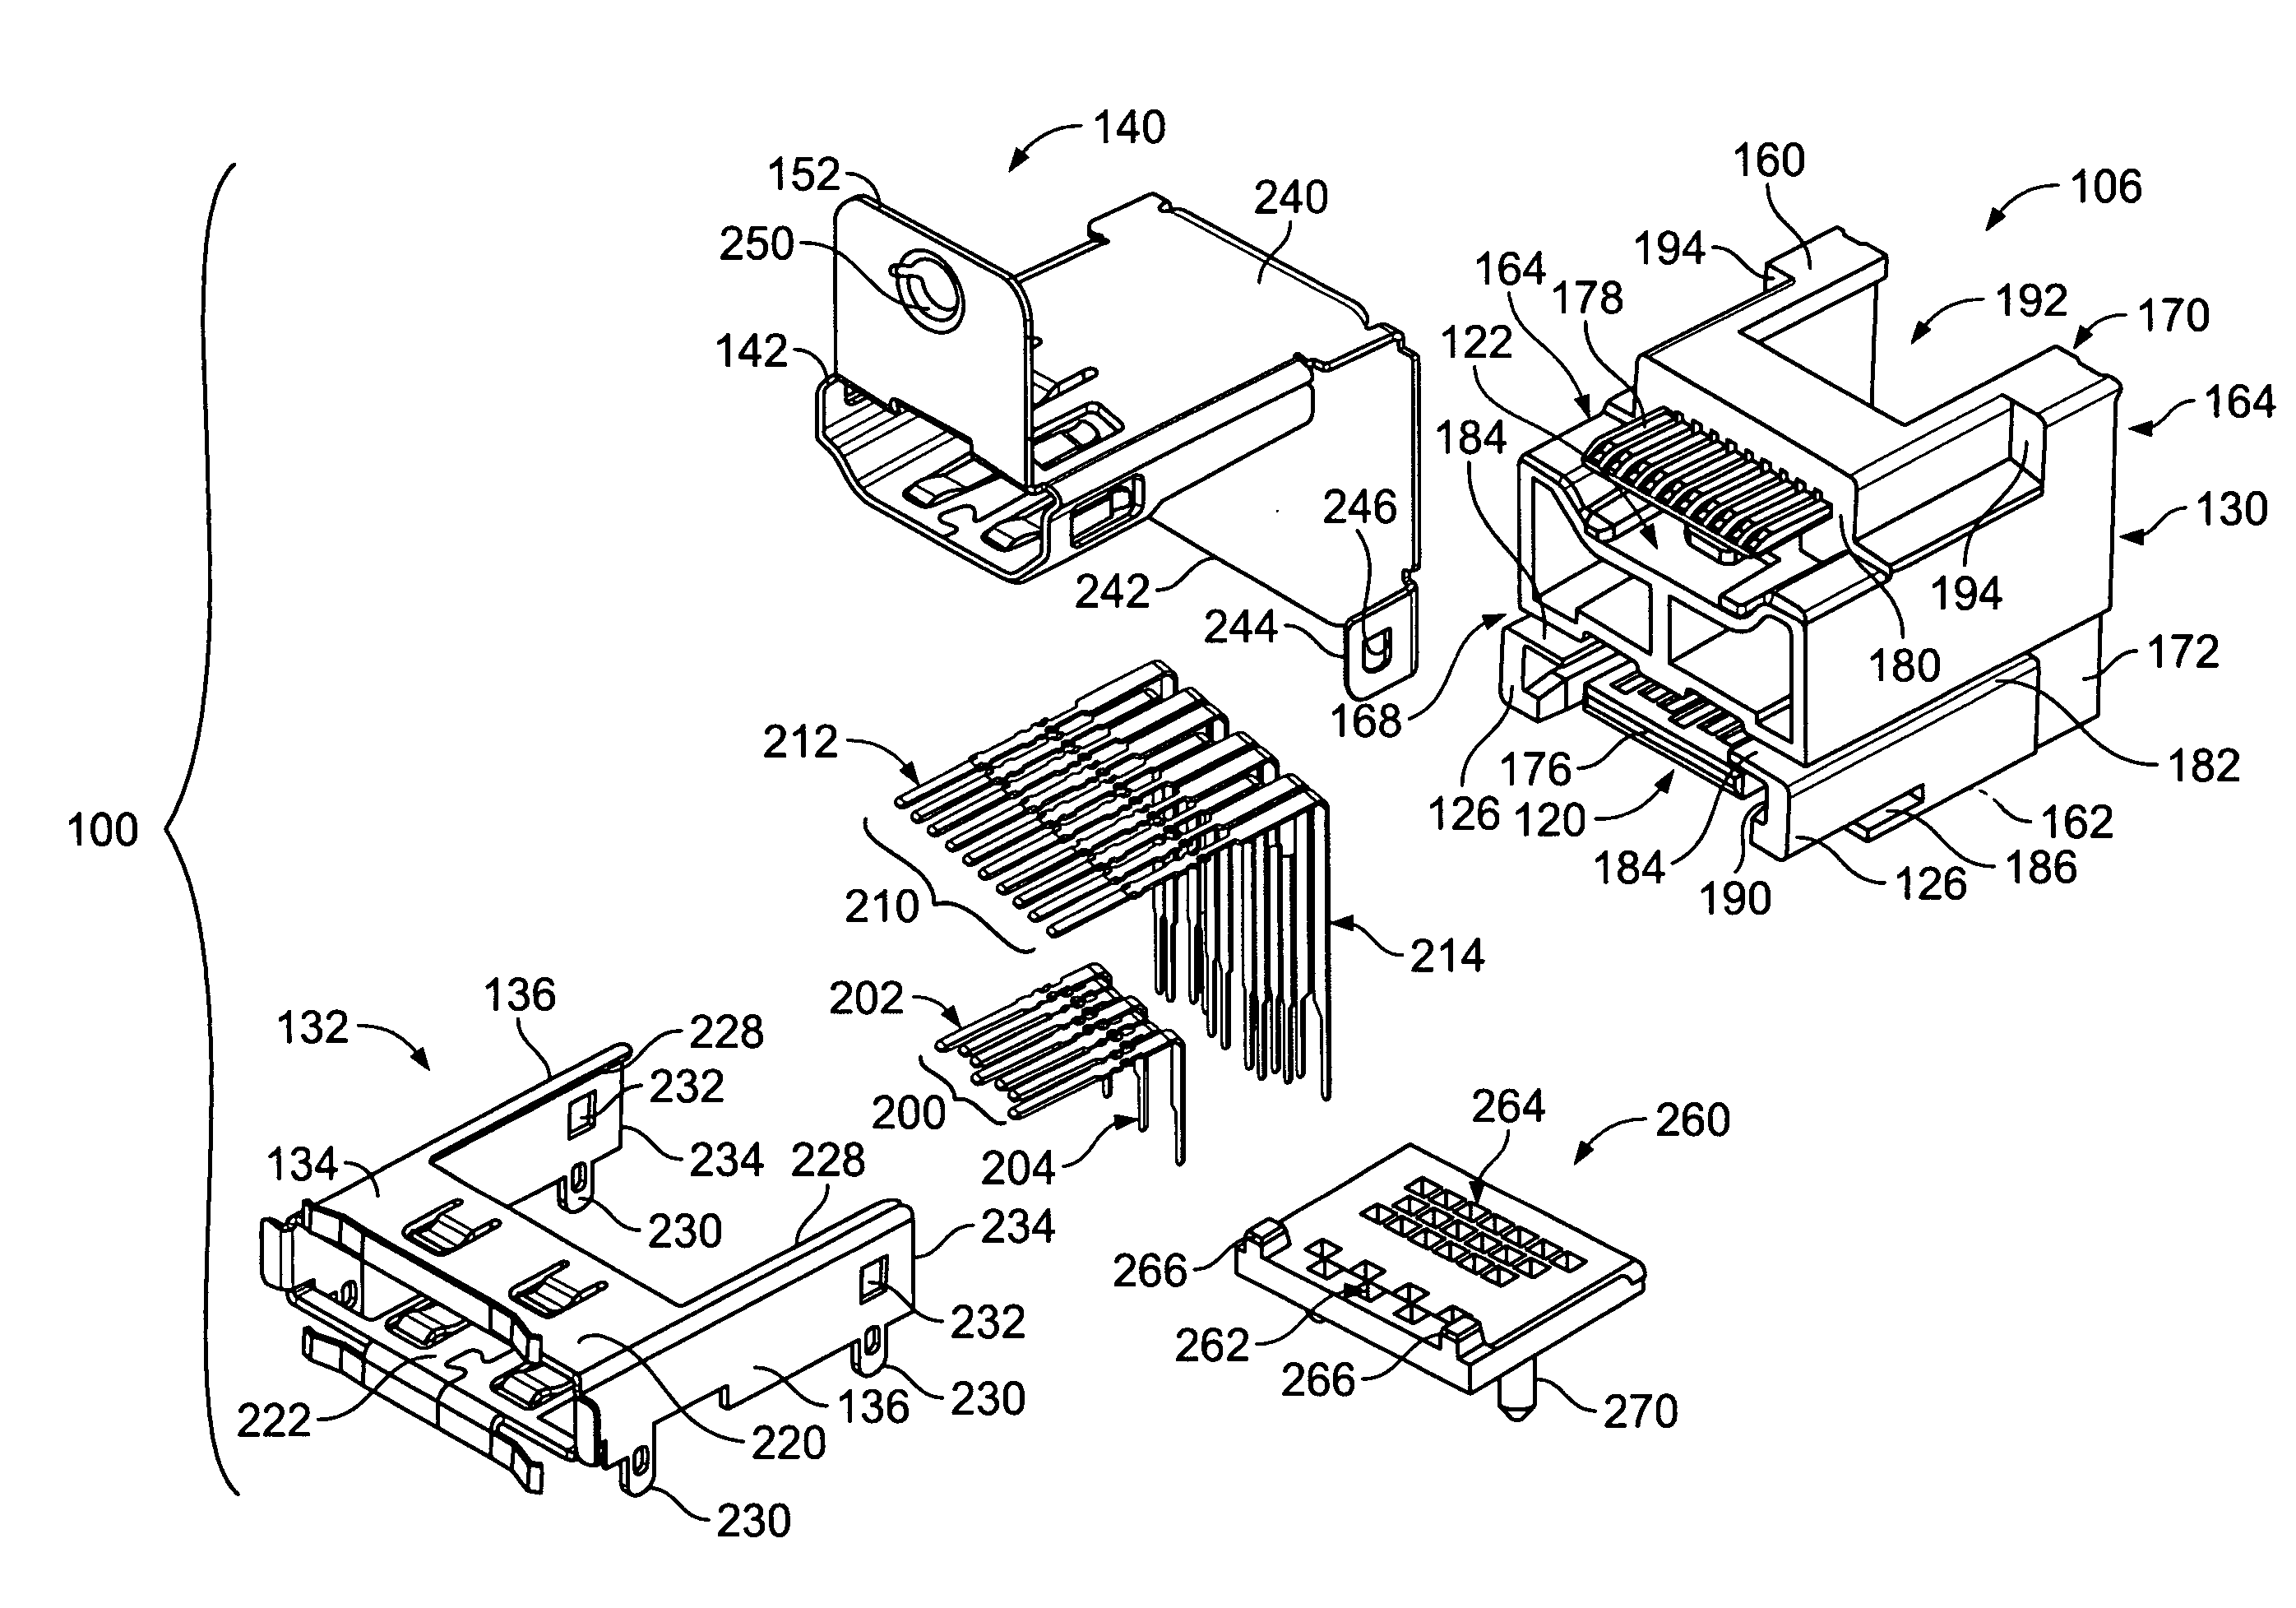 Stacked connector assembly